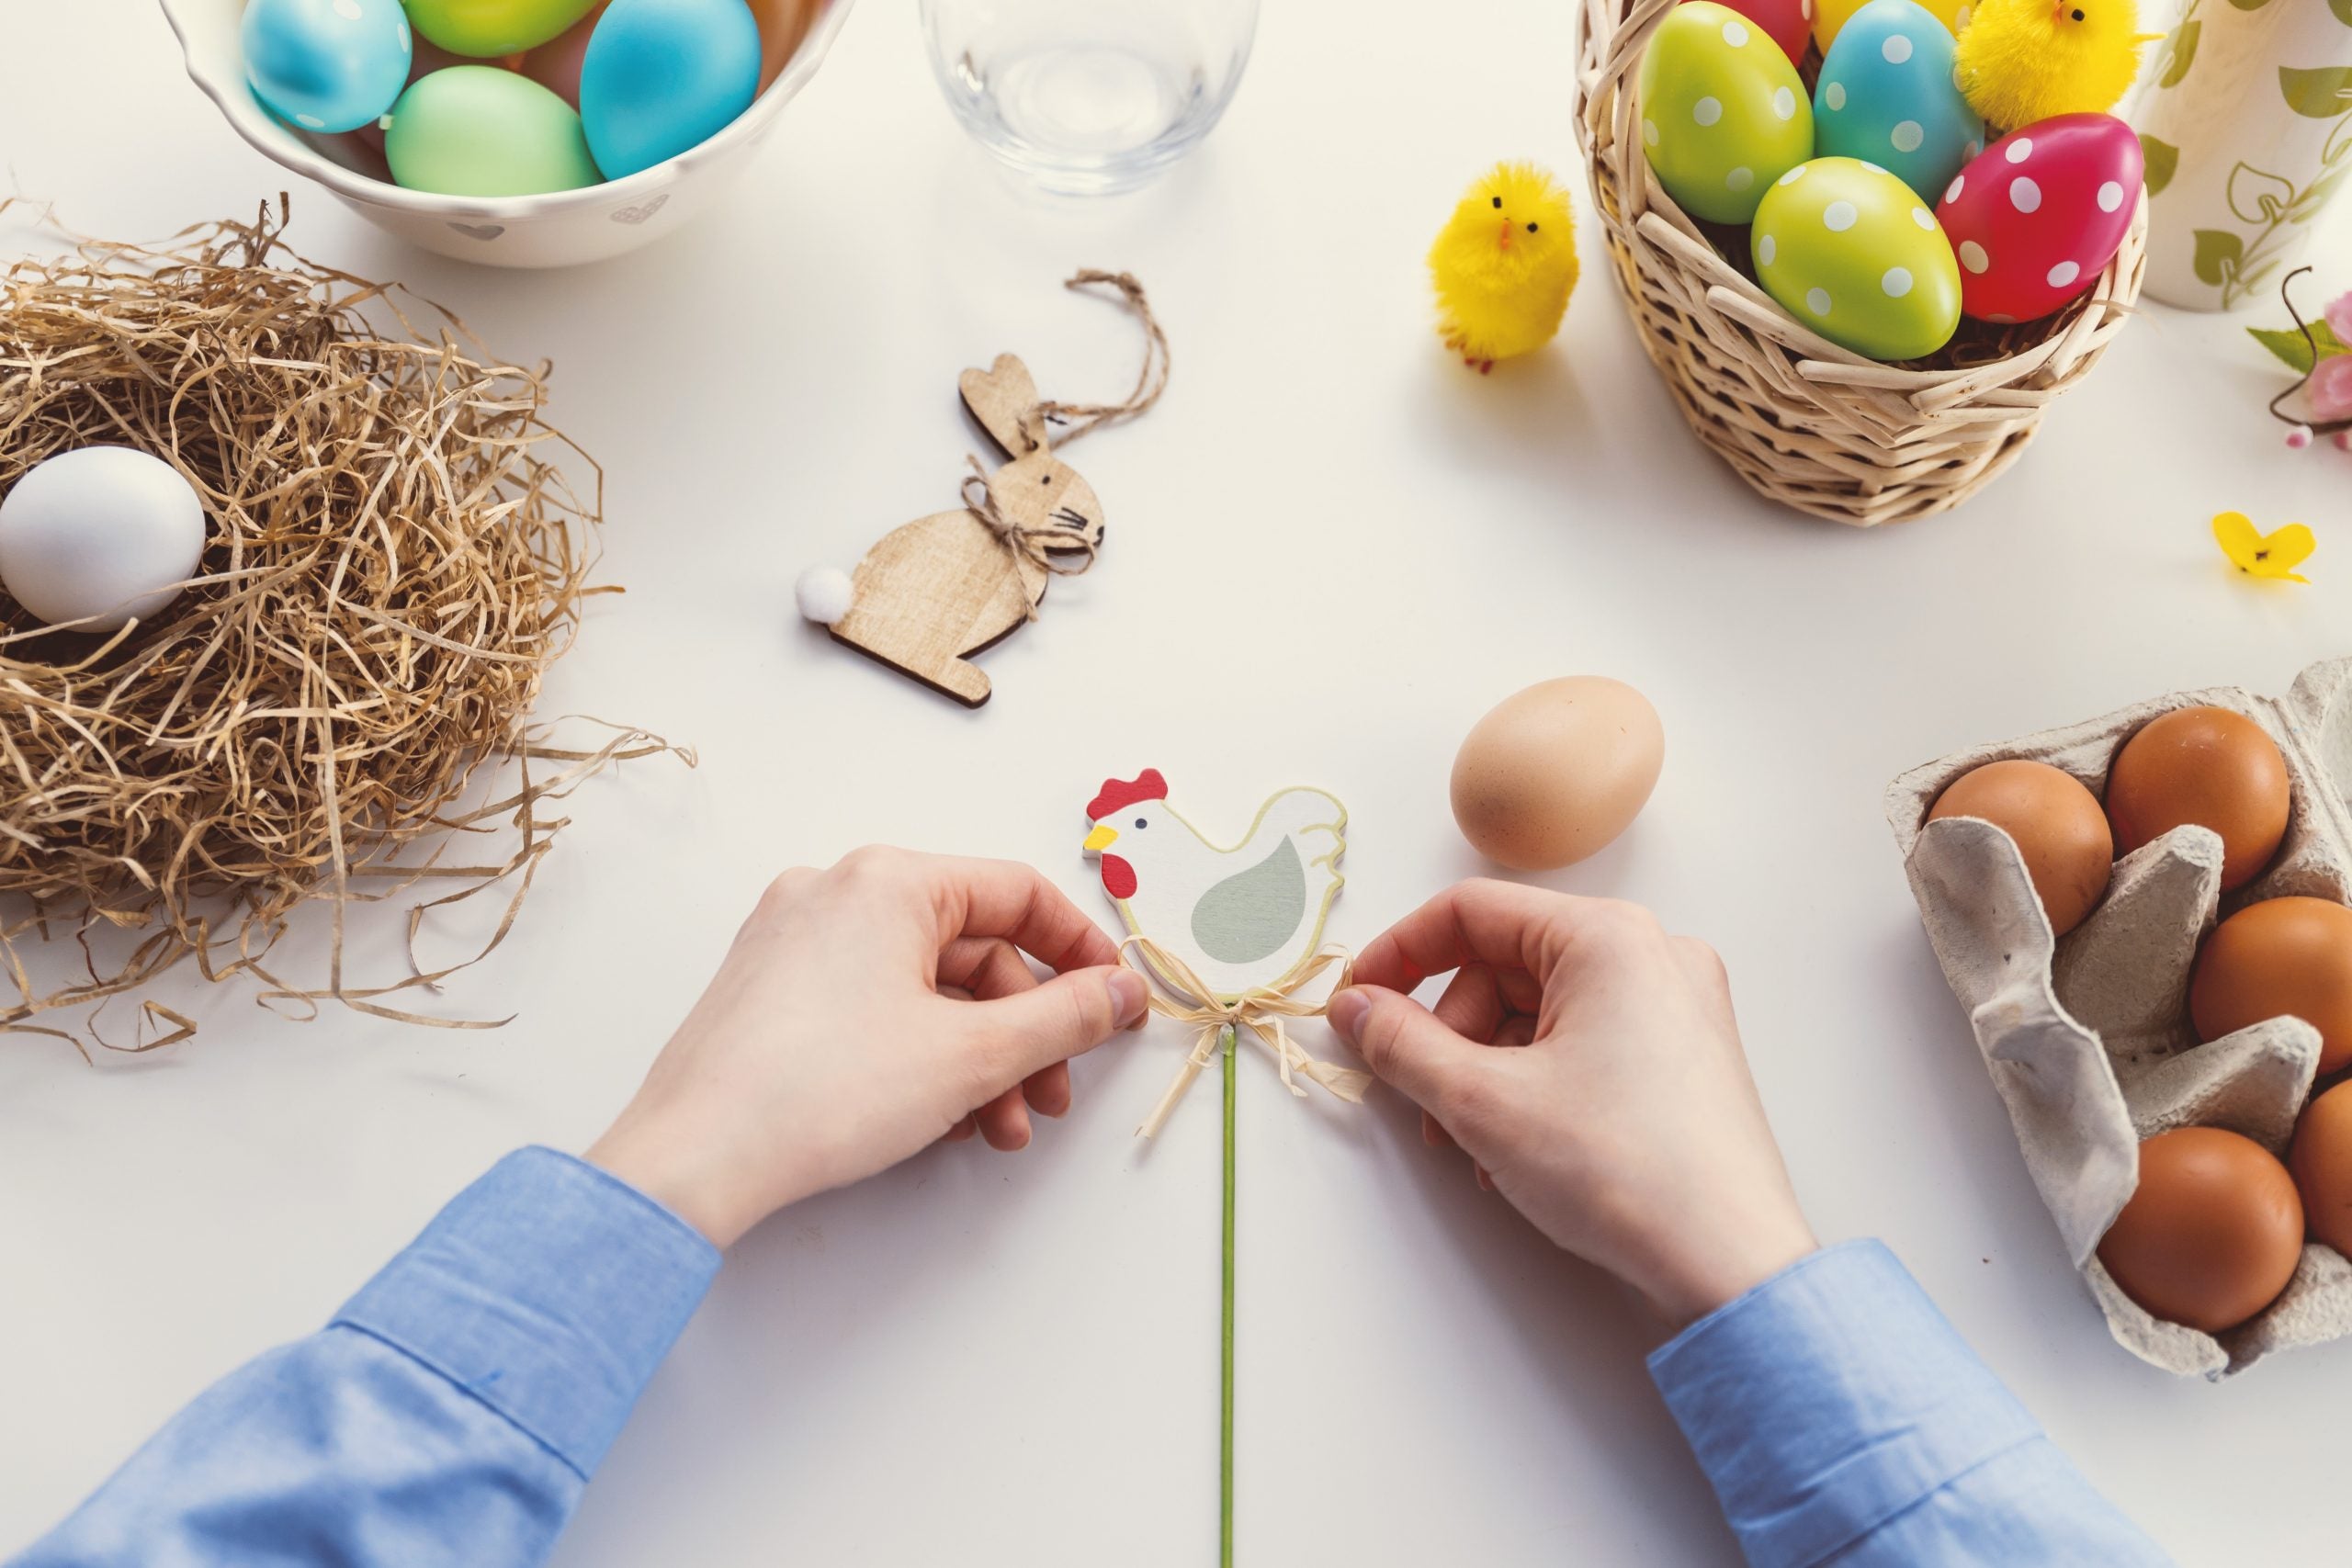 How To Make Sure Of a Fun-filled Easter?